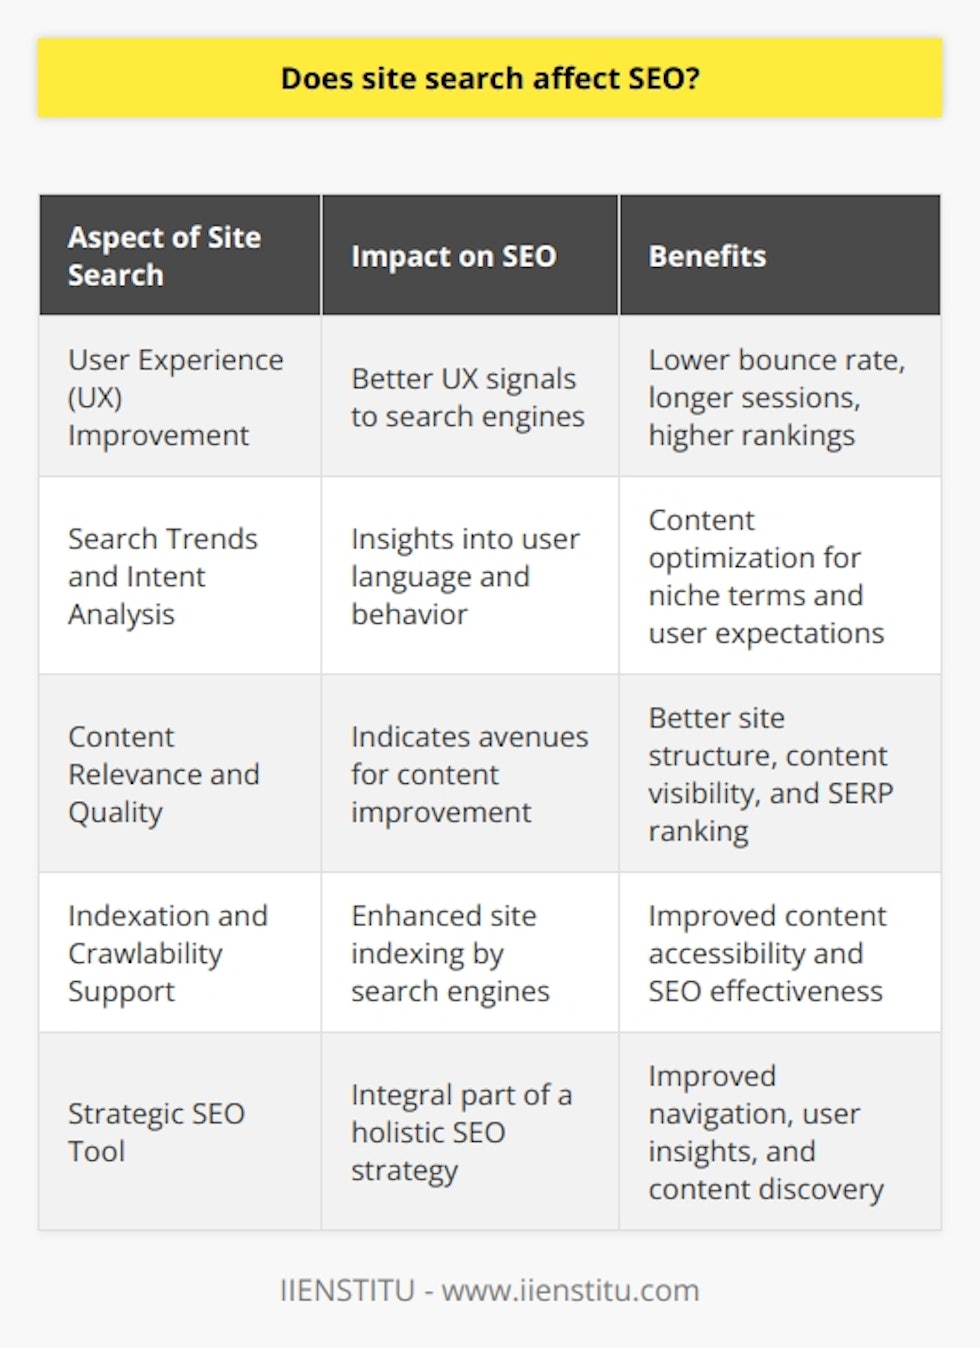 Site search, the feature that enables users to navigate a website and quickly access the content they need, is a cornerstone of web design that can have far-reaching effects on search engine optimization (SEO). Implementing a robust site search can significantly influence a website's visibility, user engagement, and ultimately, its standings in search engine results pages (SERPs).Improving User Experience and Engagement:Effective site search greatly improves user experience (UX) by streamlining access to relevant content. When users can find what they’re looking for with ease, they are more likely to engage with the site for longer periods. Search engines take note of these user behavior signals. A low bounce rate and extended session duration suggest that the site is offering value, prompting search engines to possibly rank it higher in the results. Since user satisfaction is a primary goal, search engines reward sites that effectively meet users’ needs.Uncovering Search Trends and Intent:The analysis of search queries used on a site's search function can be a goldmine for SEO strategy. It offers insights into the language and patterns users employ to describe their needs, which might be rare or unique to specific audiences. By identifying these niche terms and phrases, a website can optimize its content to address these inquiries, potentially ranking for queries that have less competition but high relevance to the site's visitors. Additionally, understanding search intent helps in crafting content that closely aligns with users' expectations, which search engines are increasingly able to parse and evaluate thanks to advancements in AI and semantic analysis.Enhancing Content Relevance and Quality:Search engines aim to deliver the most relevant and quality content to their users. If visitors regularly use site search to explore content, it can signal to the website owner the need to improve the visibility or quality of certain pages. By adjusting site structure, content quality, and on-page SEO, webpage owners can ensure that important content is easily accessible not just to users but also to search engine crawlers. Consistently updated and relevant content is essential in maintaining and improving SERP rankings.Aiding Indexation and Crawlability:A well-implemented site search can facilitate better indexing by search engines. If search engines can crawl a site easily and interpret the user interaction data, they can index the site content more accurately. In contrast, if the site search is poorly implemented or absent, critical content might remain hidden from both users and search engines, undermining the website's SEO potential. Proper design of a site search interface ensures that high-value content is recognized and properly indexed, thereby feeding the search engines with ample information of what high-quality content the site holds.In summary, site search is more than a mere convenience tool for users – it's an integral component of a website's SEO strategy. Facilitating seamless navigation, providing actionable user insights, and ensuring that content is easy to discover and index, all contribute to the potency of the site search in the context of SEO. As search engines continue to evolve, becoming more sophisticated in understanding user behavior and content relevance, the role of site search will undoubtedly become even more crucial in the quest to improve online visibility and rankings.